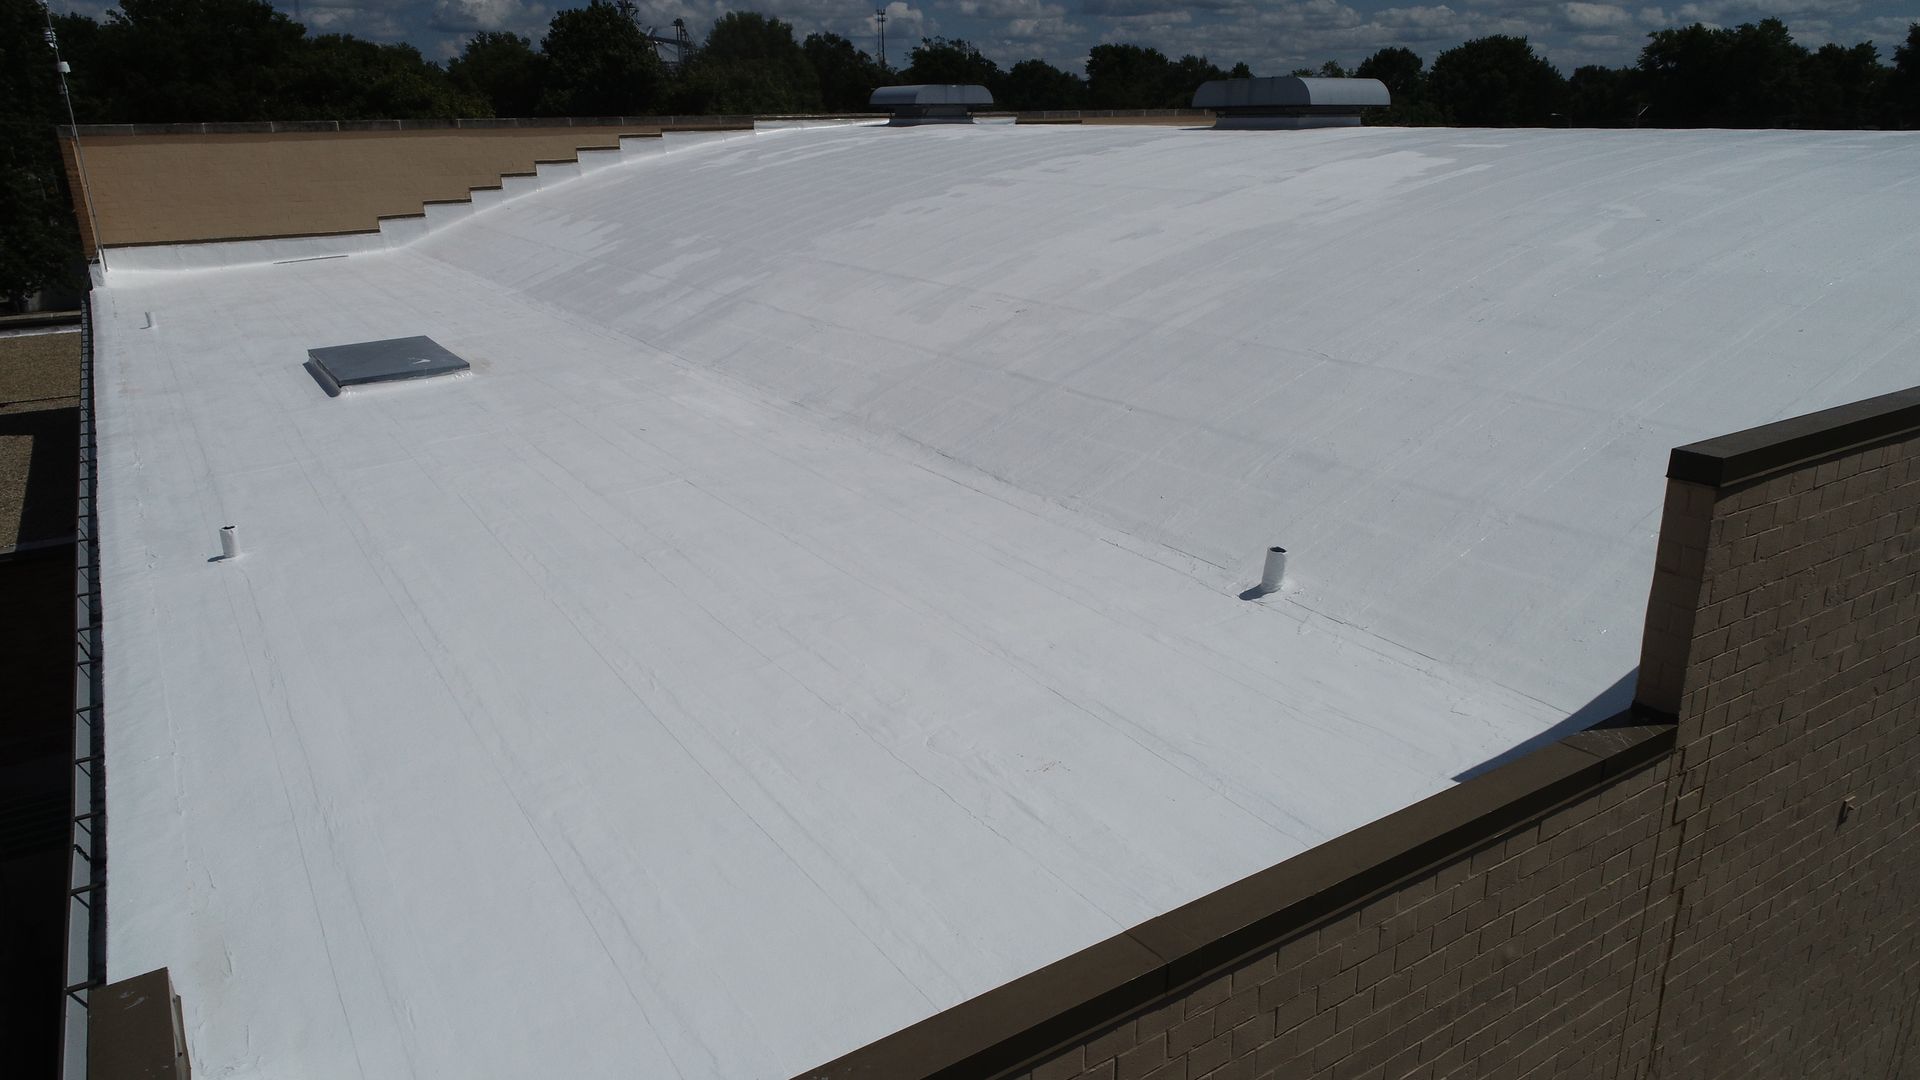 Reflective white roof coating on a distinctively arched barrel roof architecture